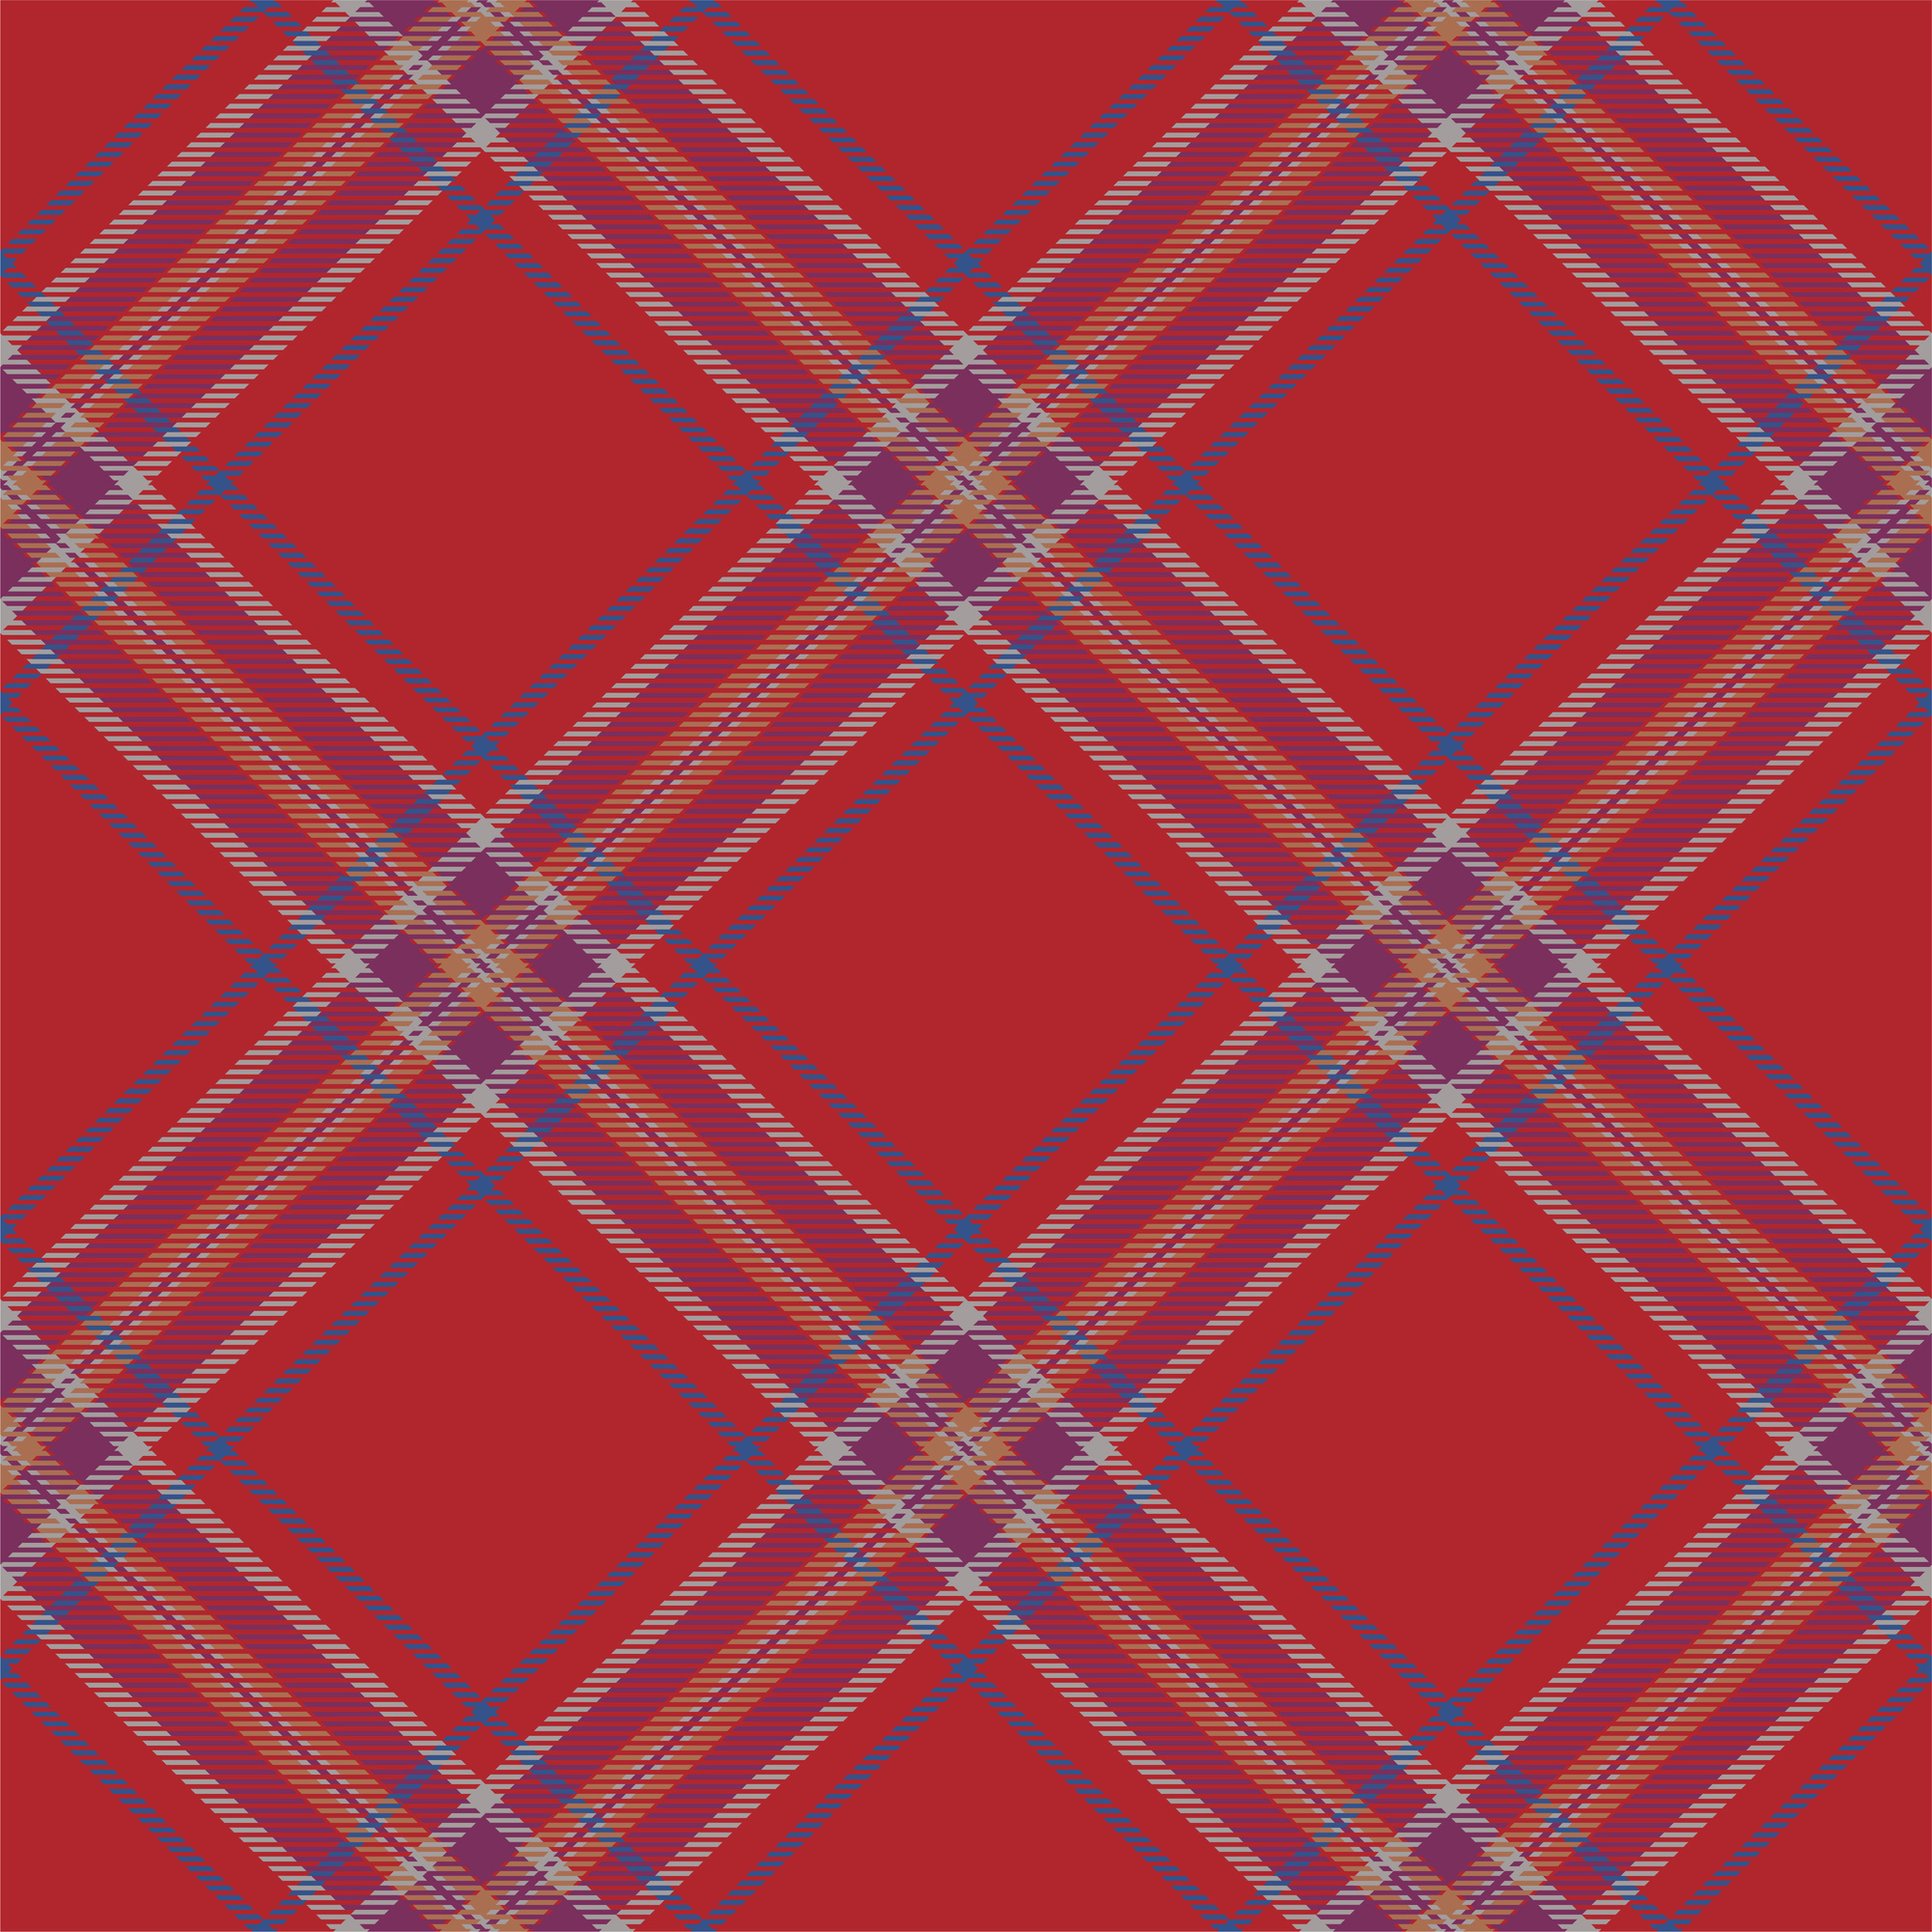 Tartan Scotland Seamless Plaid Pattern Vector. Retro Background Fabric. Vintage Check Color Square Geometric Texture for Textile Print, Wrapping Paper, Gift Card, Wallpaper Design.